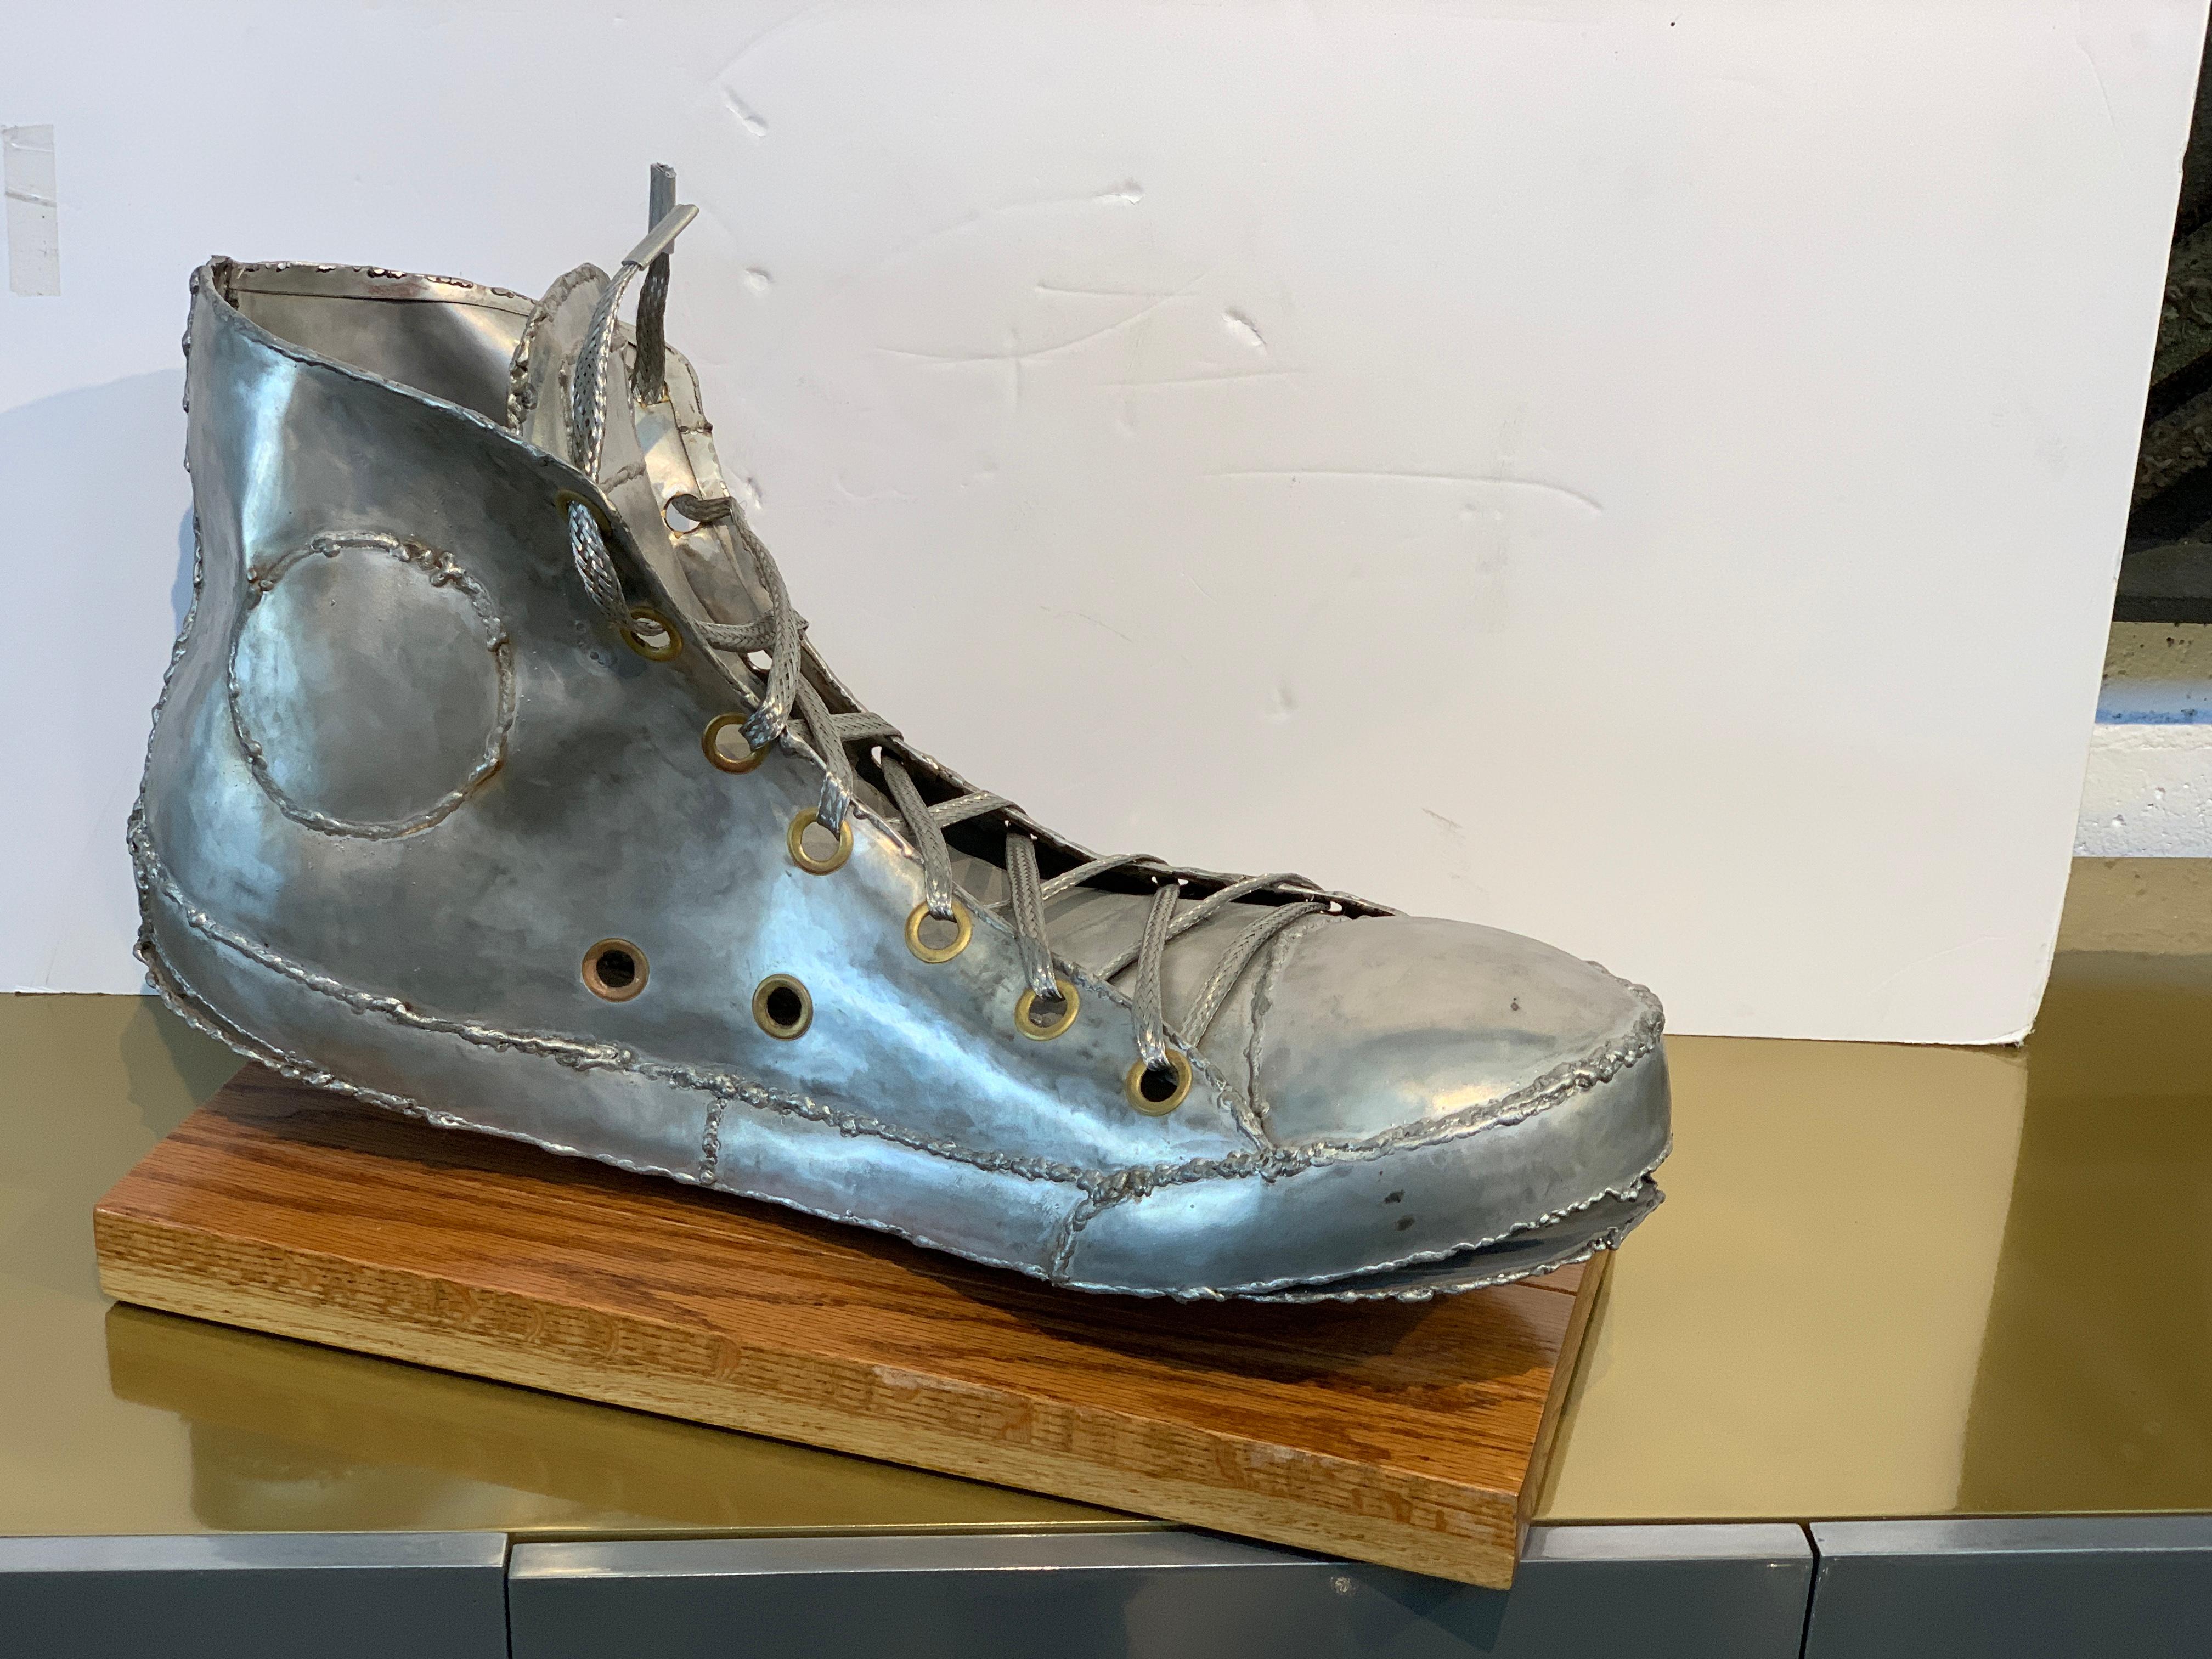 A marvelous sculpture of a Converse Chuck Taylor sneaker in Aluminum(?) or metal. A magnet does not adhere. It is hand welded or soldered and is monogrammed on the tongue, which is pictured. The sculptured is mounted on an oak base. The sculpture